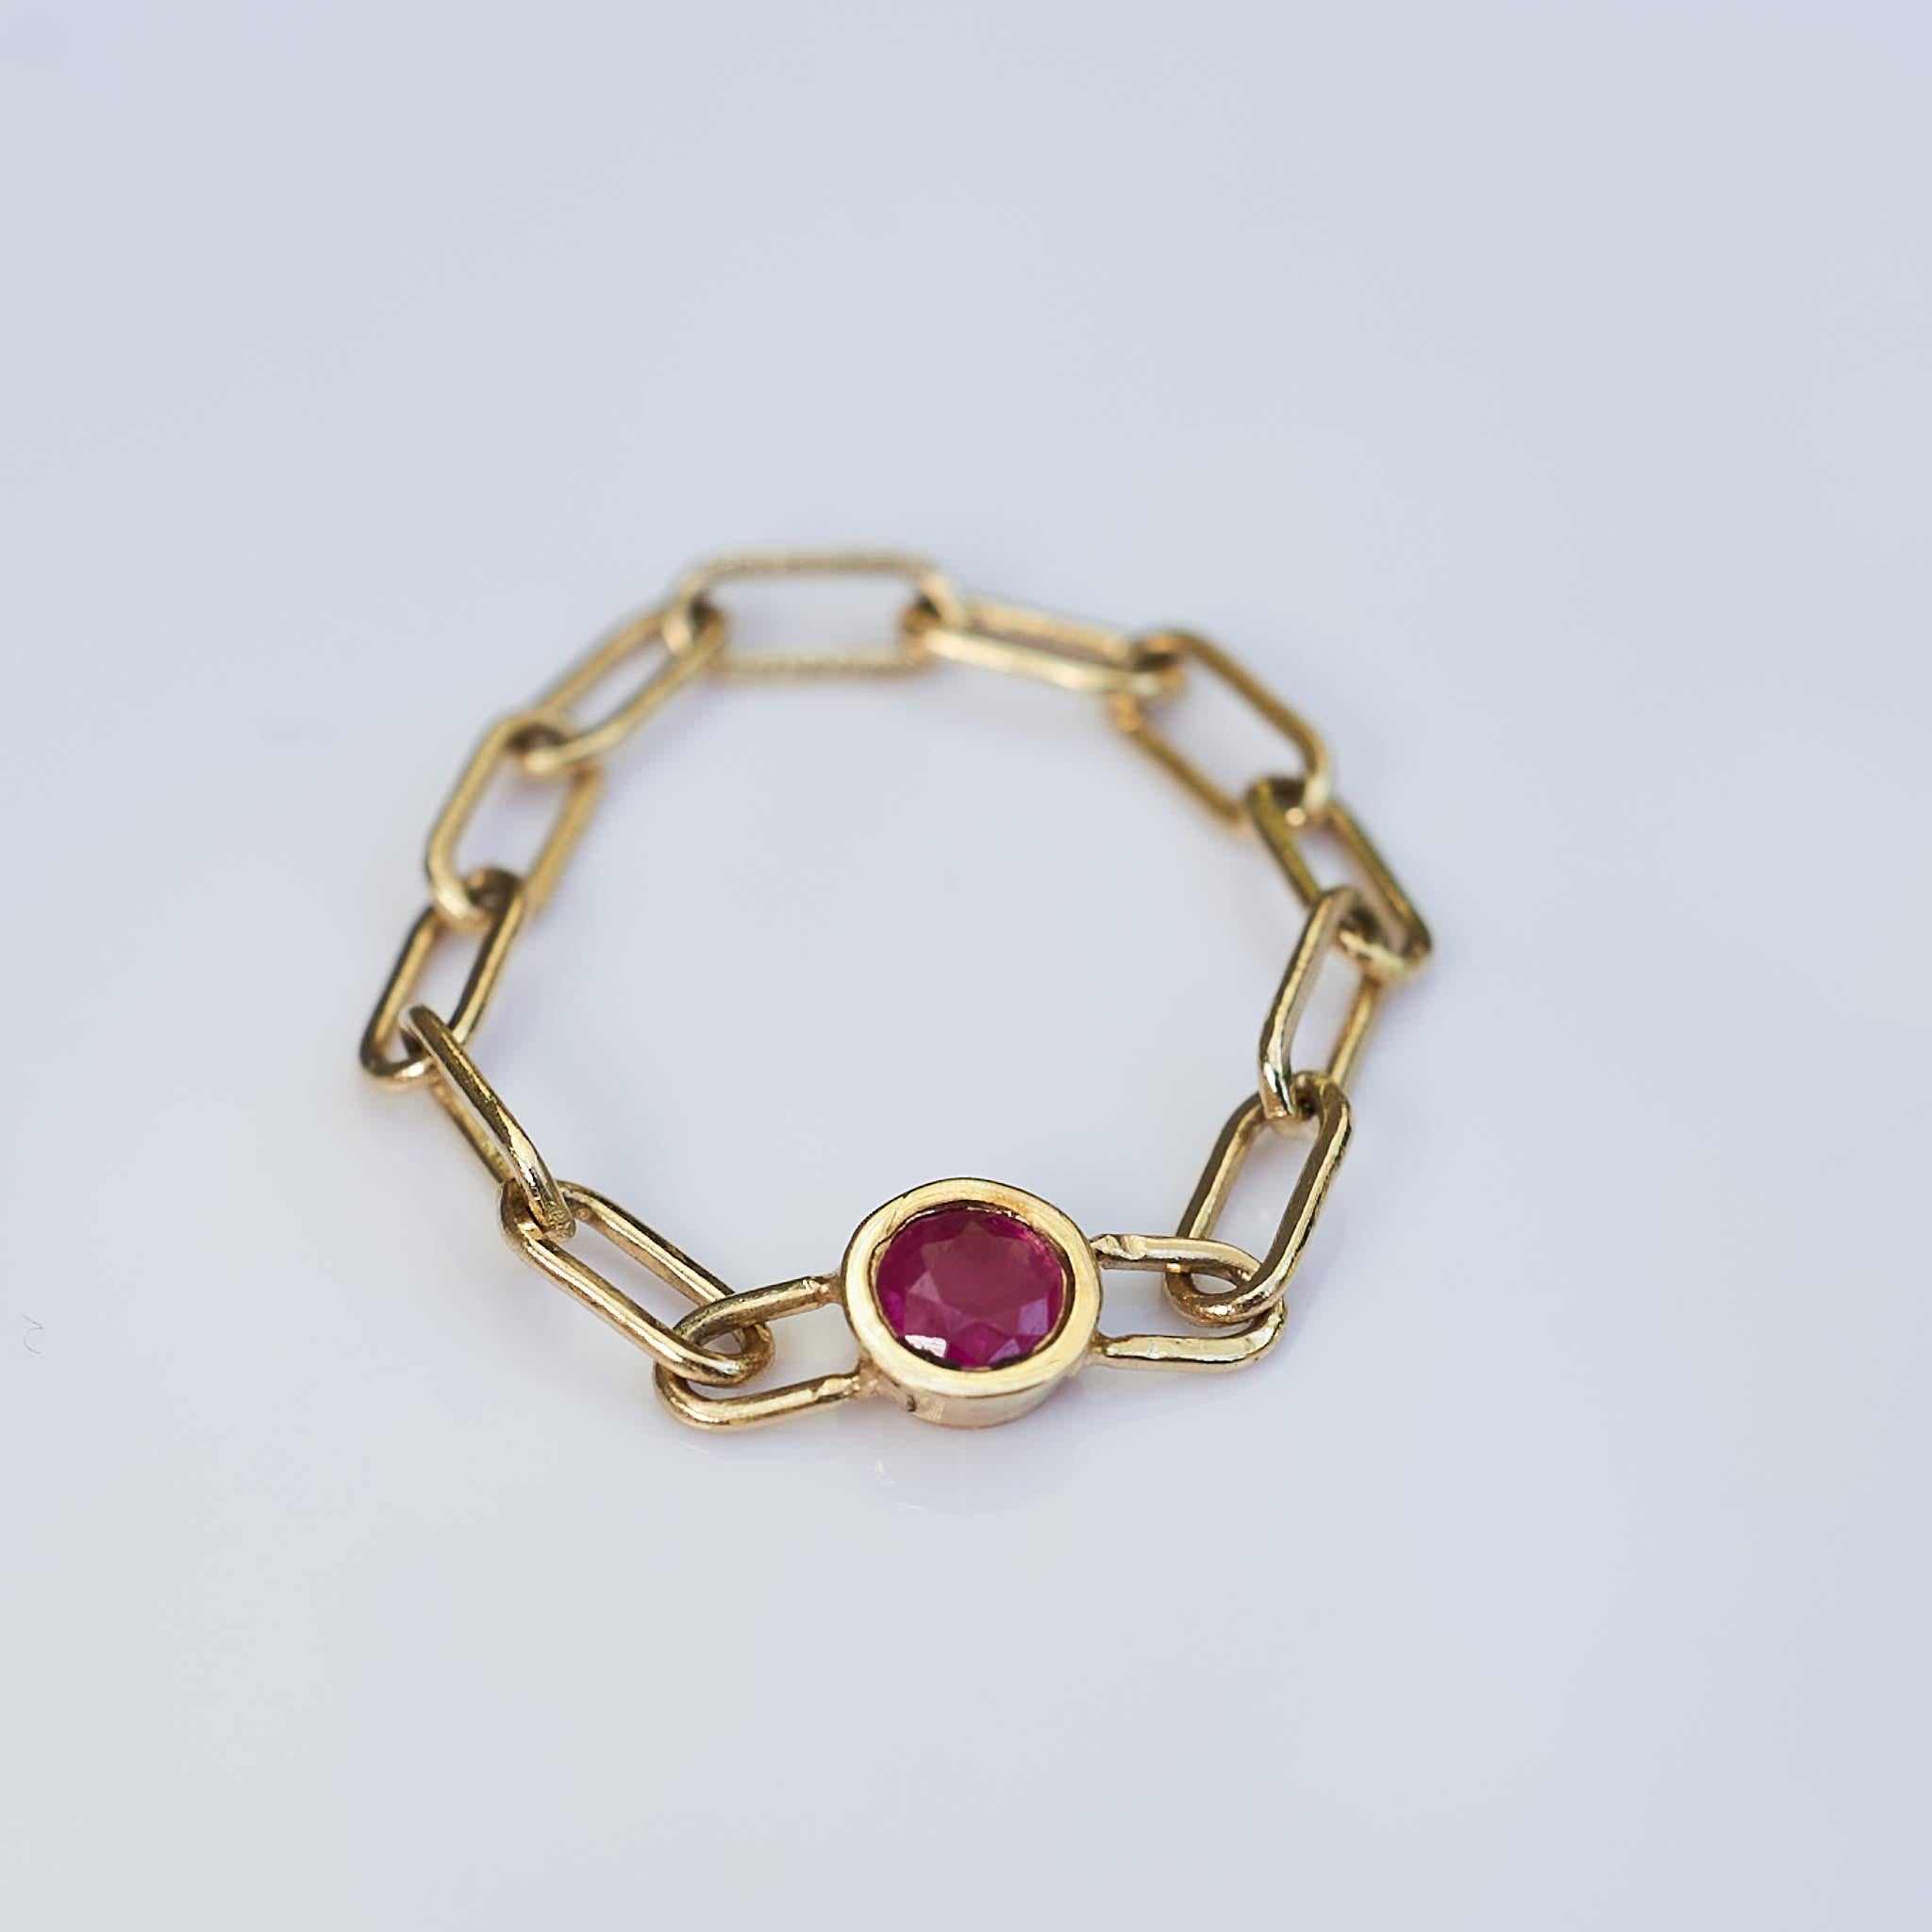 Contemporary Gold Chain Ring Pink Tourmaline 14K Stack Ring J Dauphin For Sale